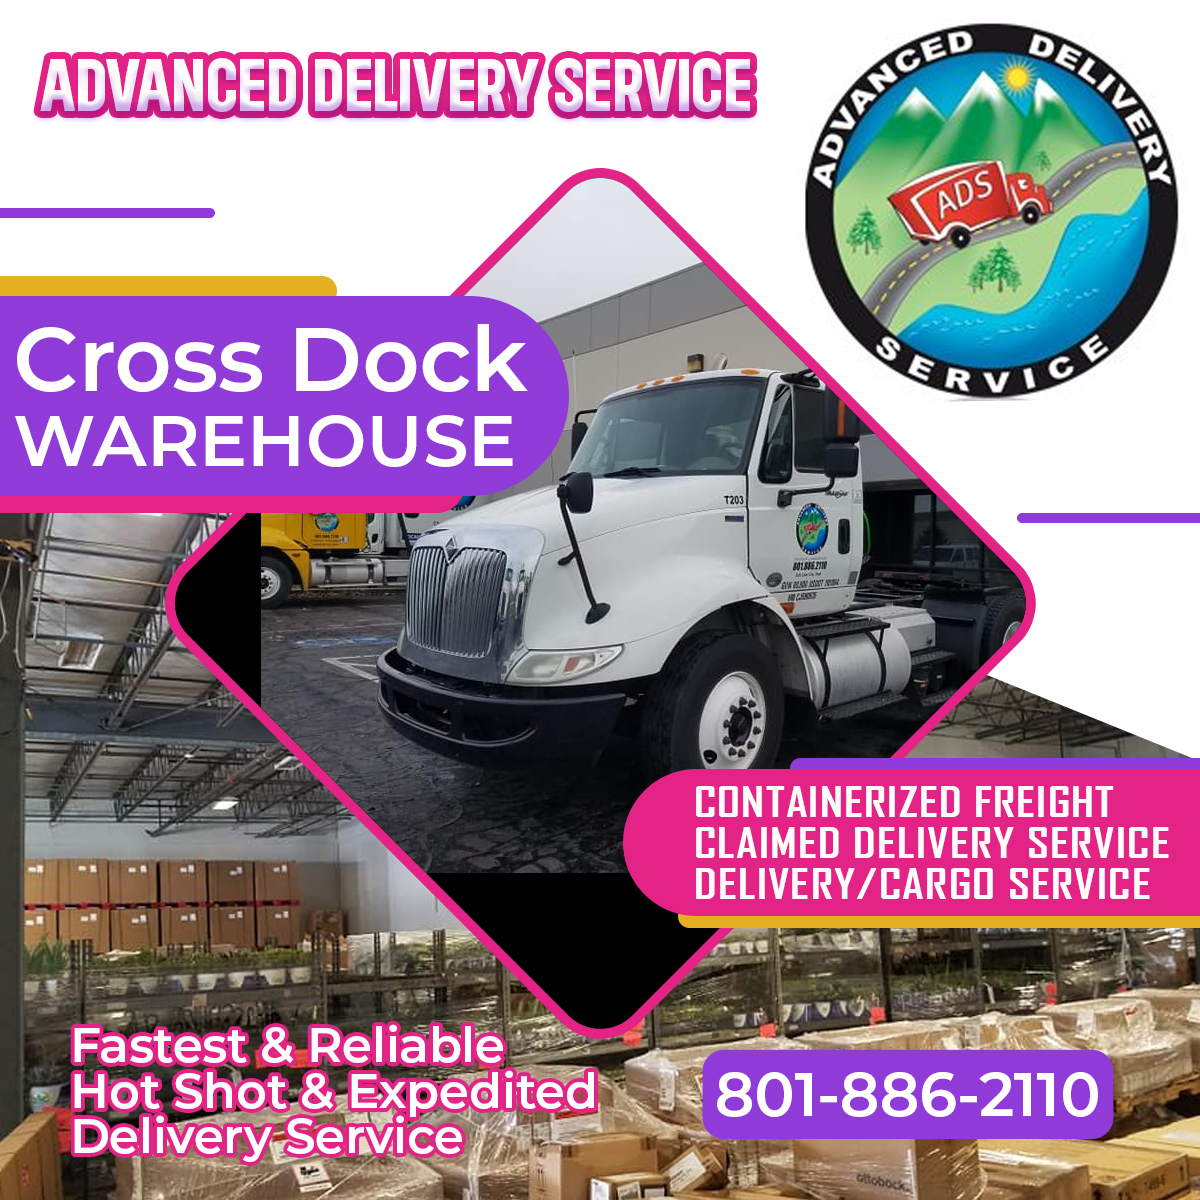 ADVANCED DELIVERY SERVICES